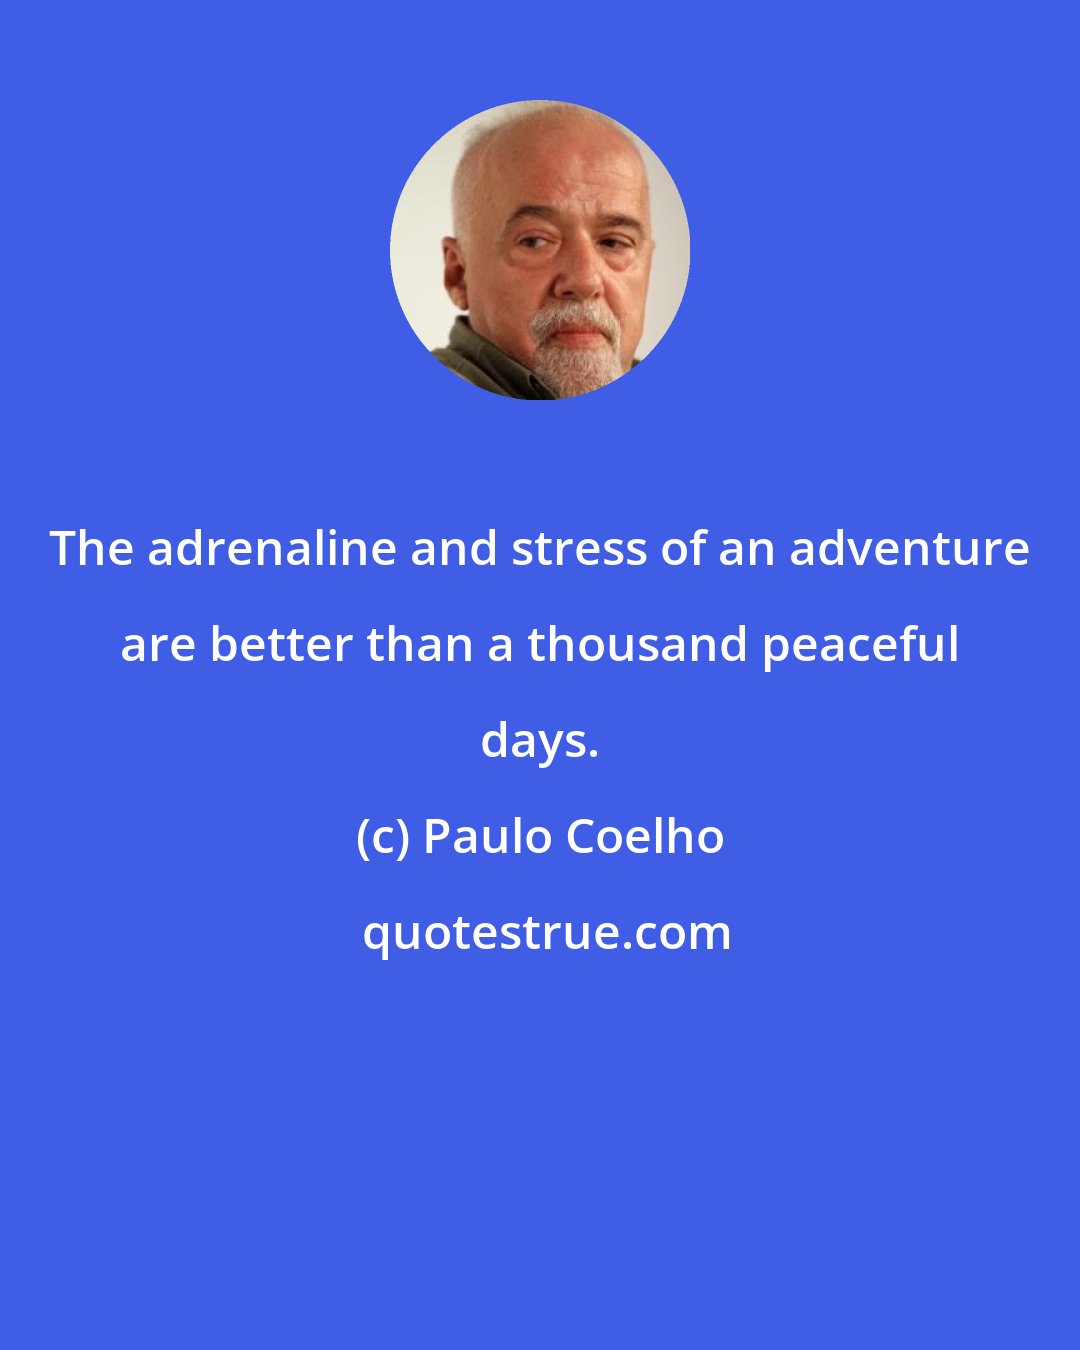 Paulo Coelho: The adrenaline and stress of an adventure are better than a thousand peaceful days.